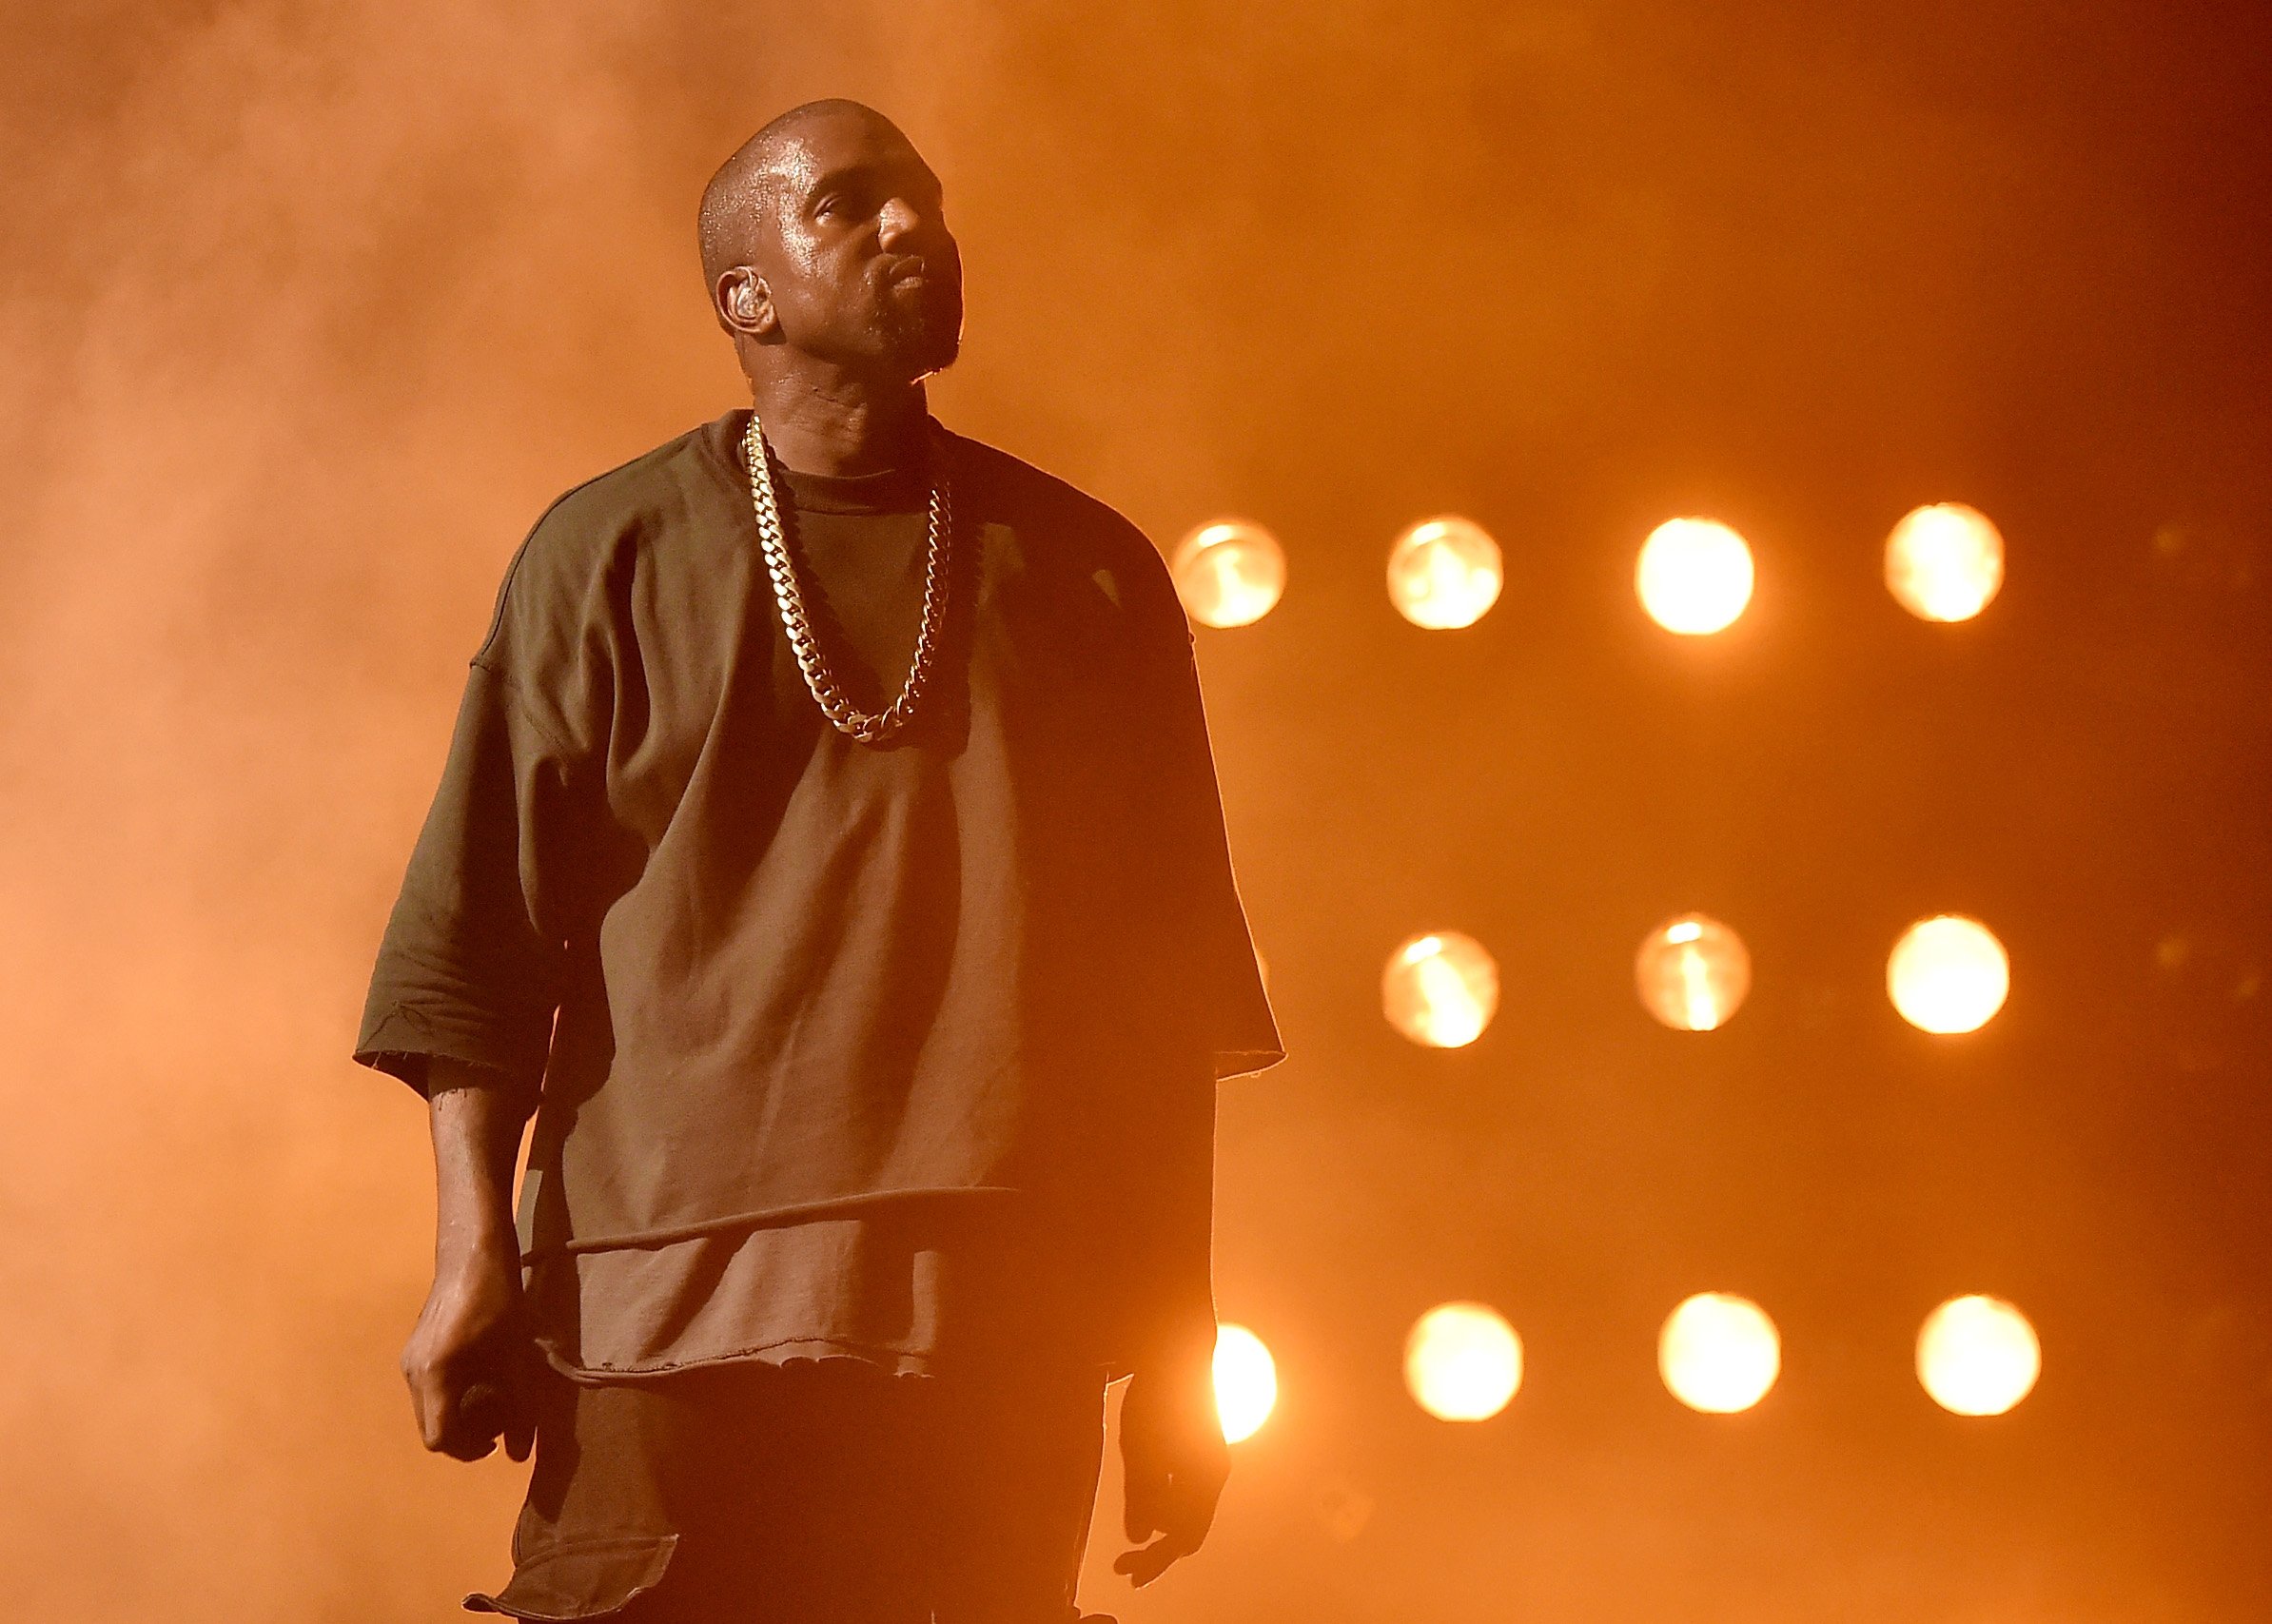 Kanye West onstage at the 2015 iHeartRadio Music Festival on September 18, 2015 | Source: Getty Images